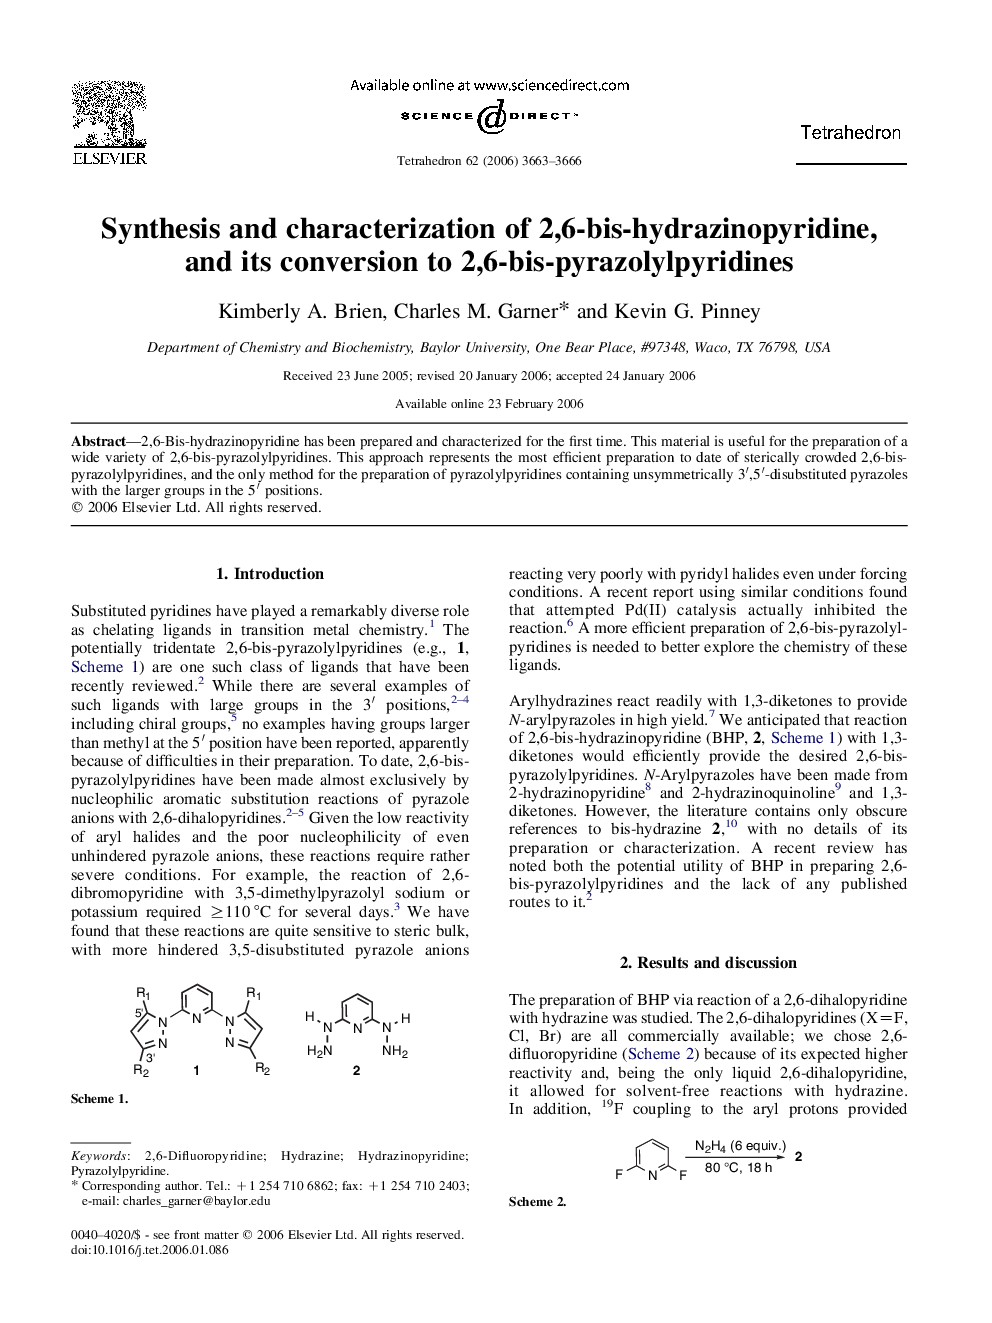 Synthesis and characterization of 2,6-bis-hydrazinopyridine, and its conversion to 2,6-bis-pyrazolylpyridines